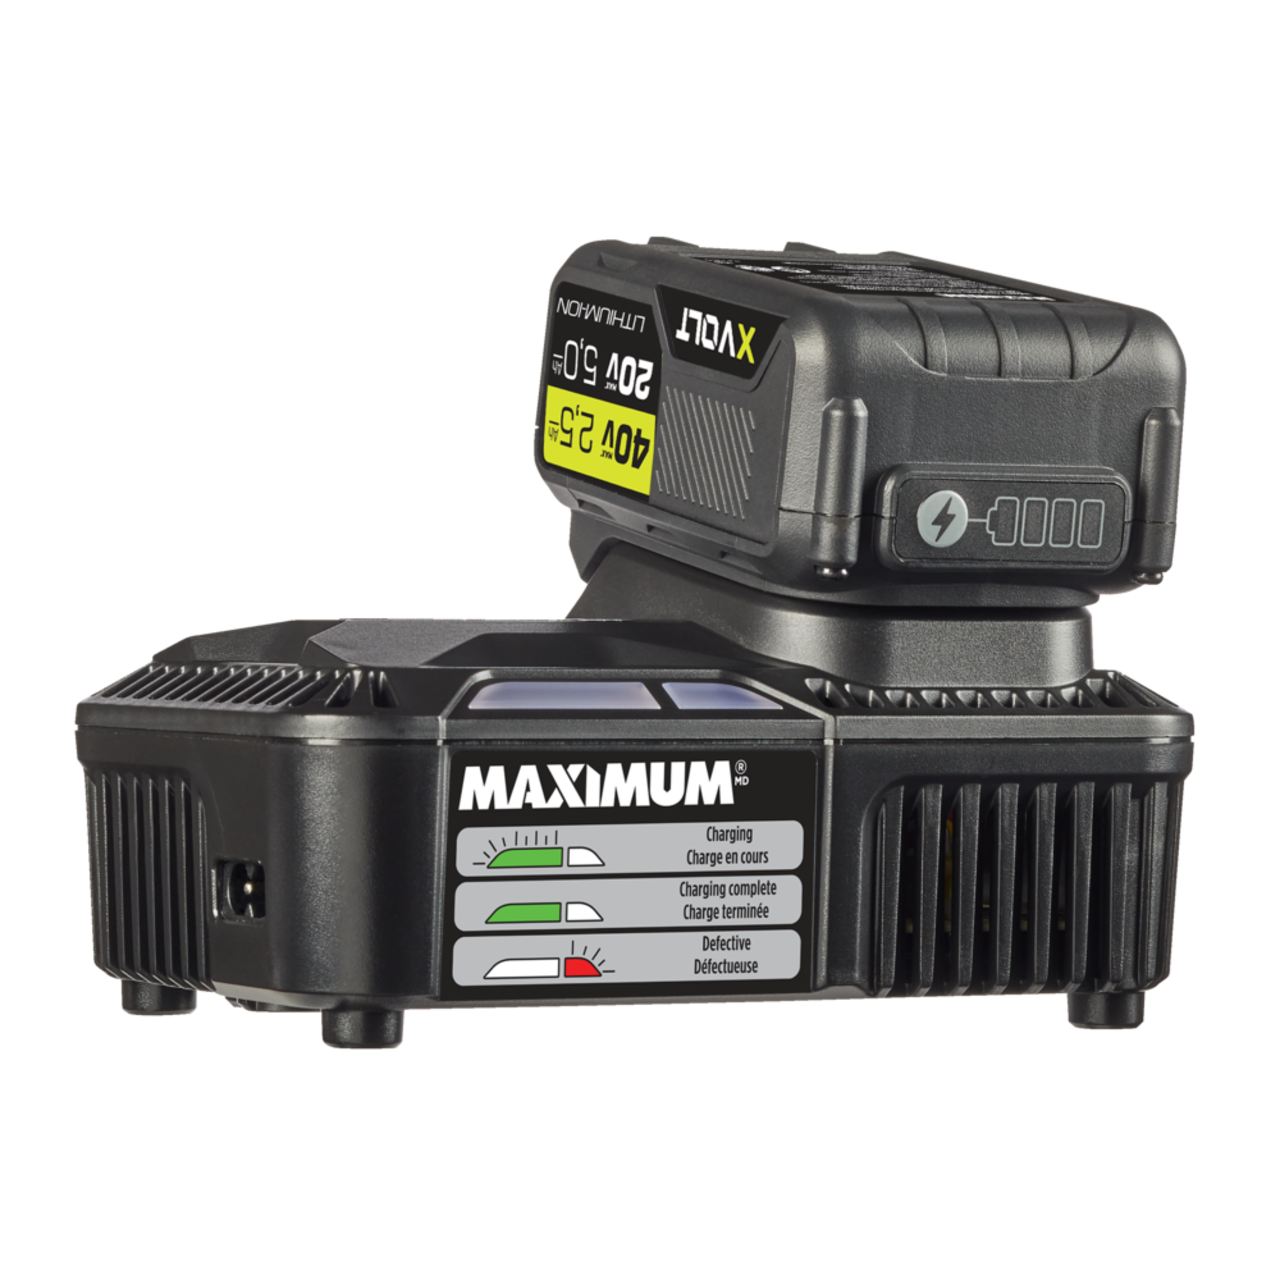 https://media-www.canadiantire.ca/product/fixing/tools/portable-power-tools/0547986/maximum-40v-battery-chrgr-kt-eb4947a7-ab5f-4a4e-949d-d7c2642b4365.png?imdensity=1&imwidth=640&impolicy=mZoom